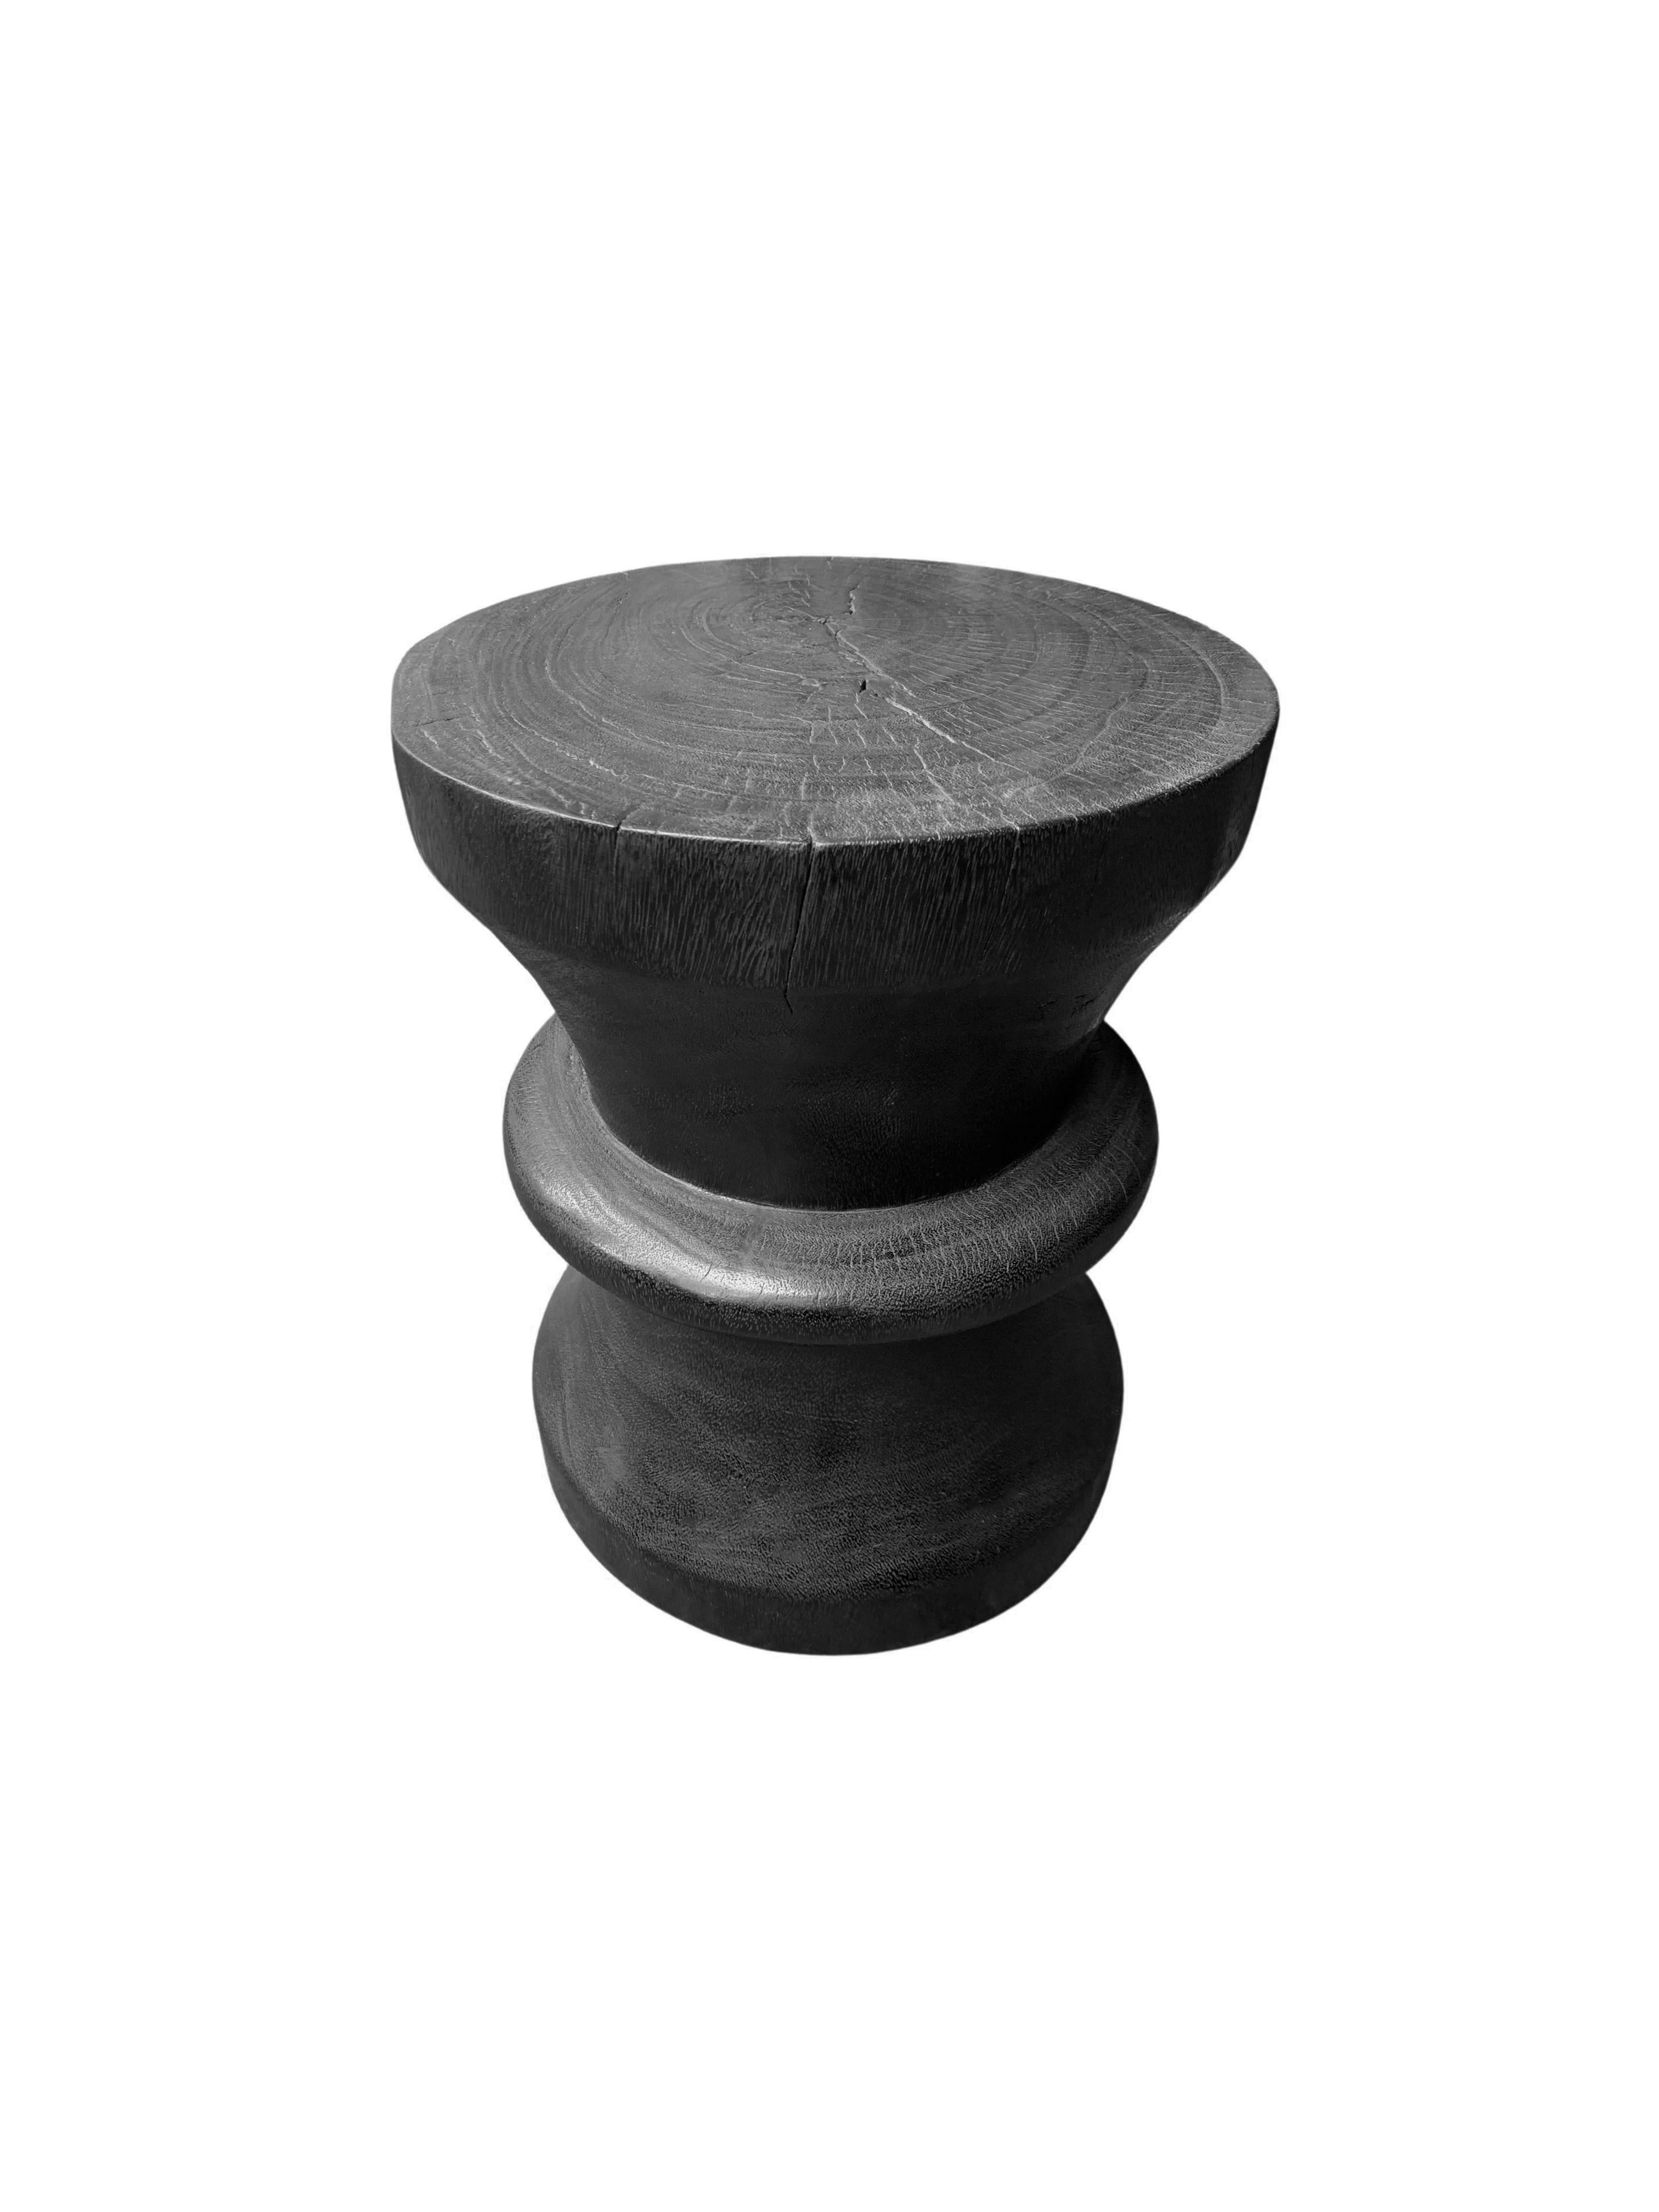 A wonderfully sculptural round side table. Its black pigment was achieved through a burning process creating both a wonderful colour and effect. Its neutral pigment and subtle wood texture makes it perfect for any space. A uniquely sculptural and